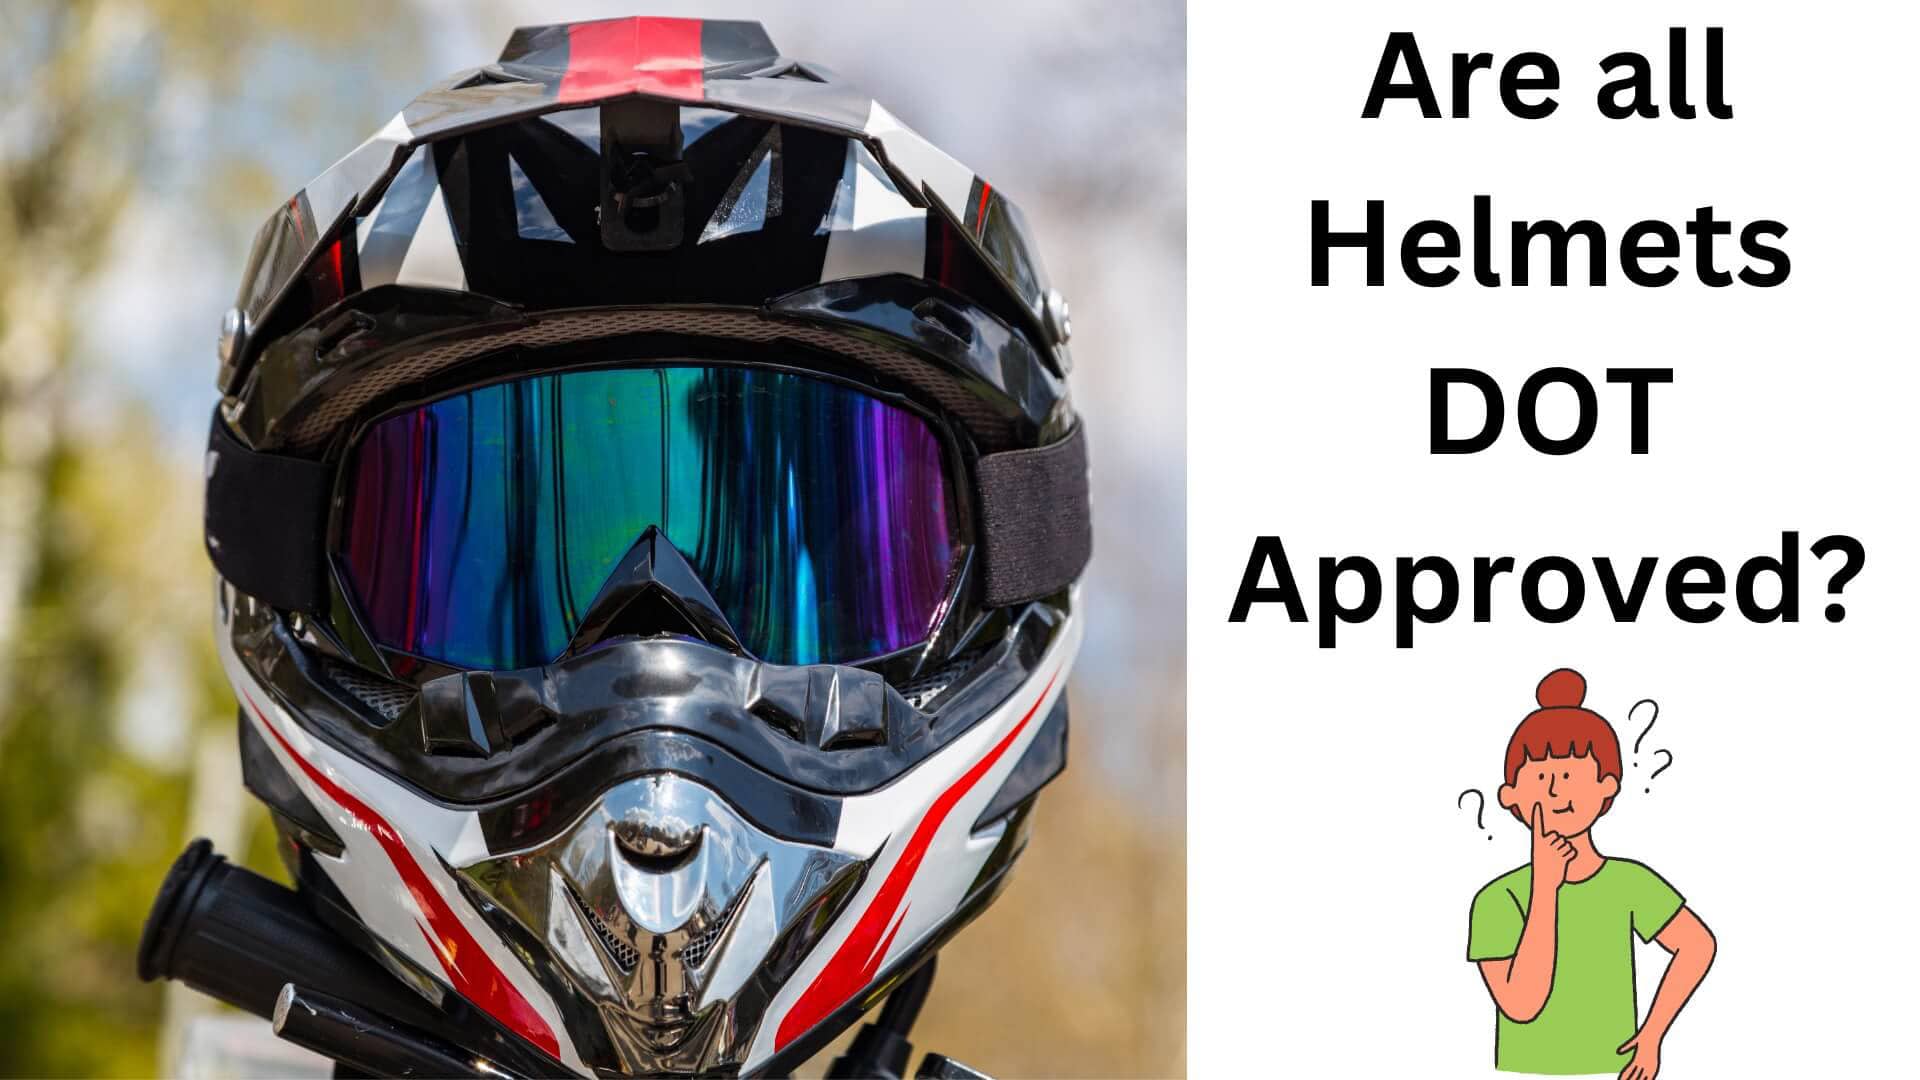 Are All Helmets Dot Approved? We Look Into The Facts